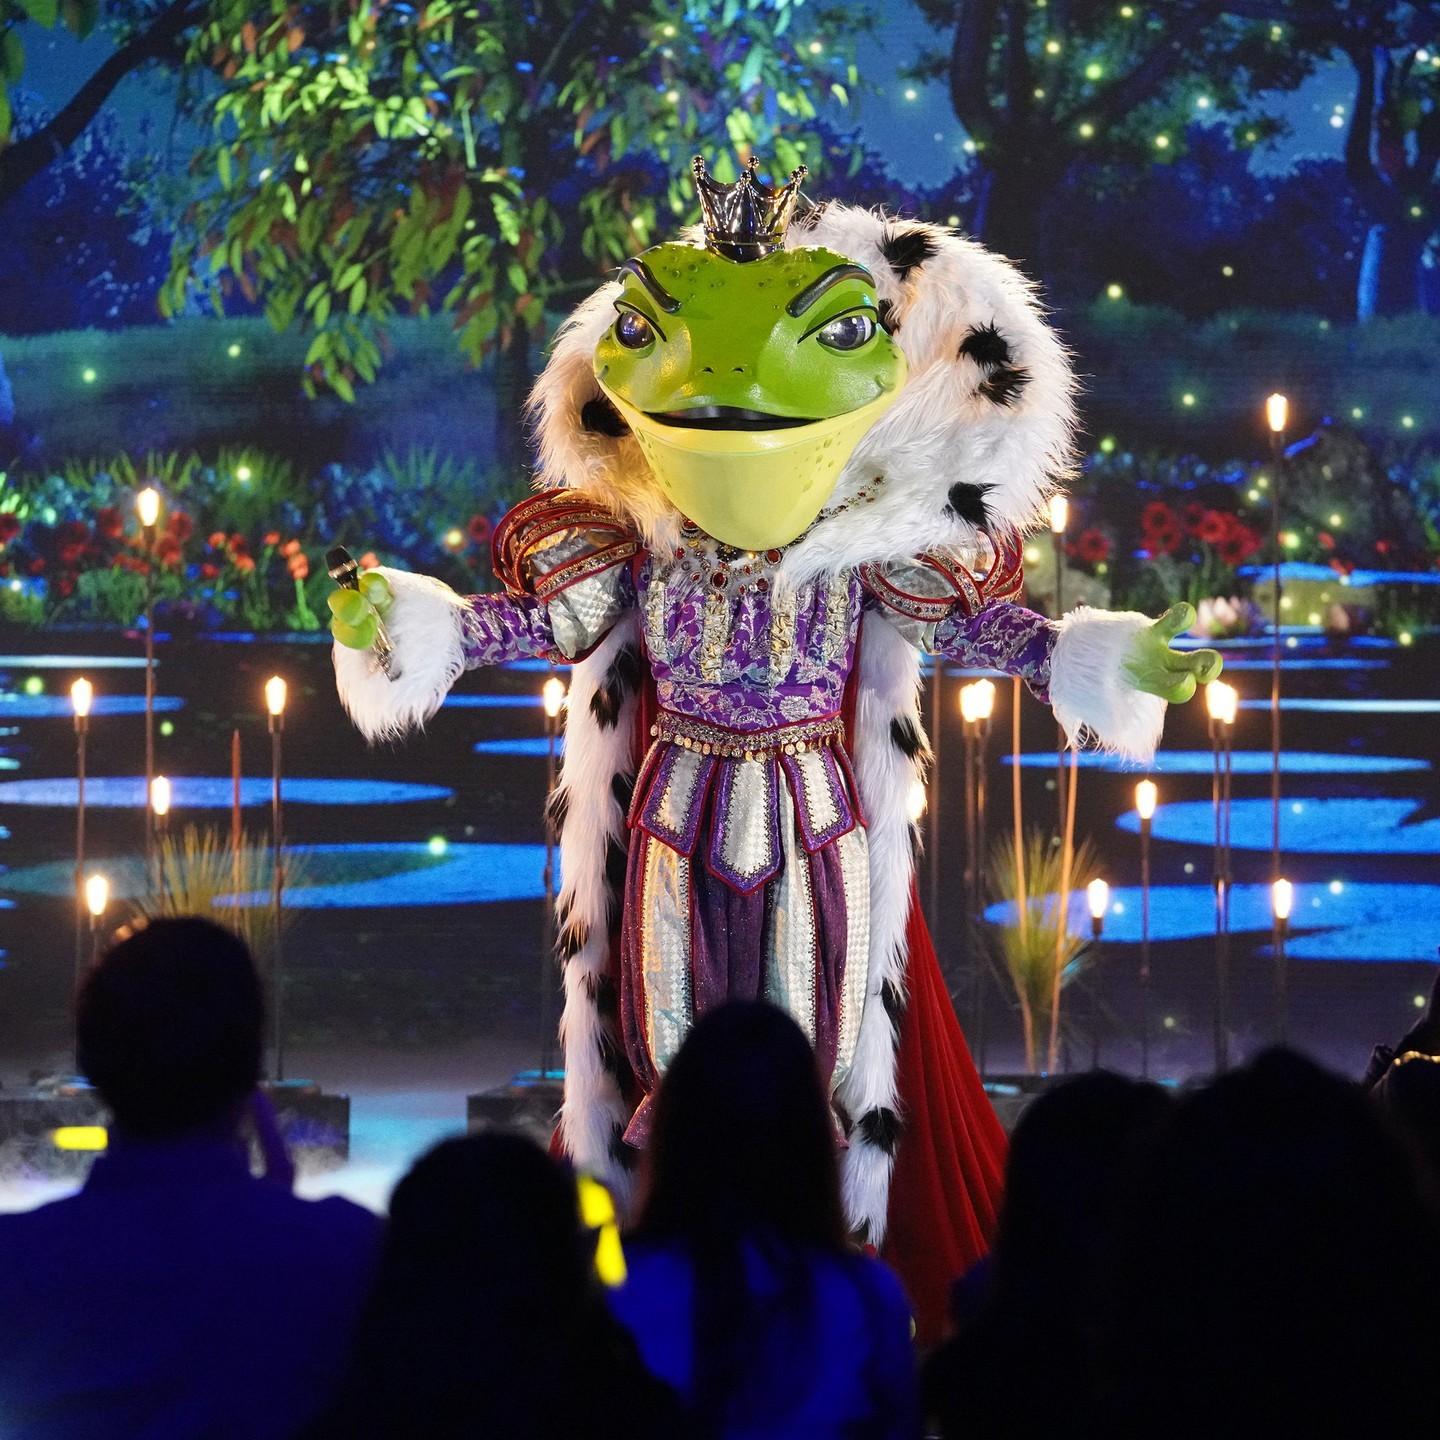 The Frog Prince on season 7 of The Masked Singer